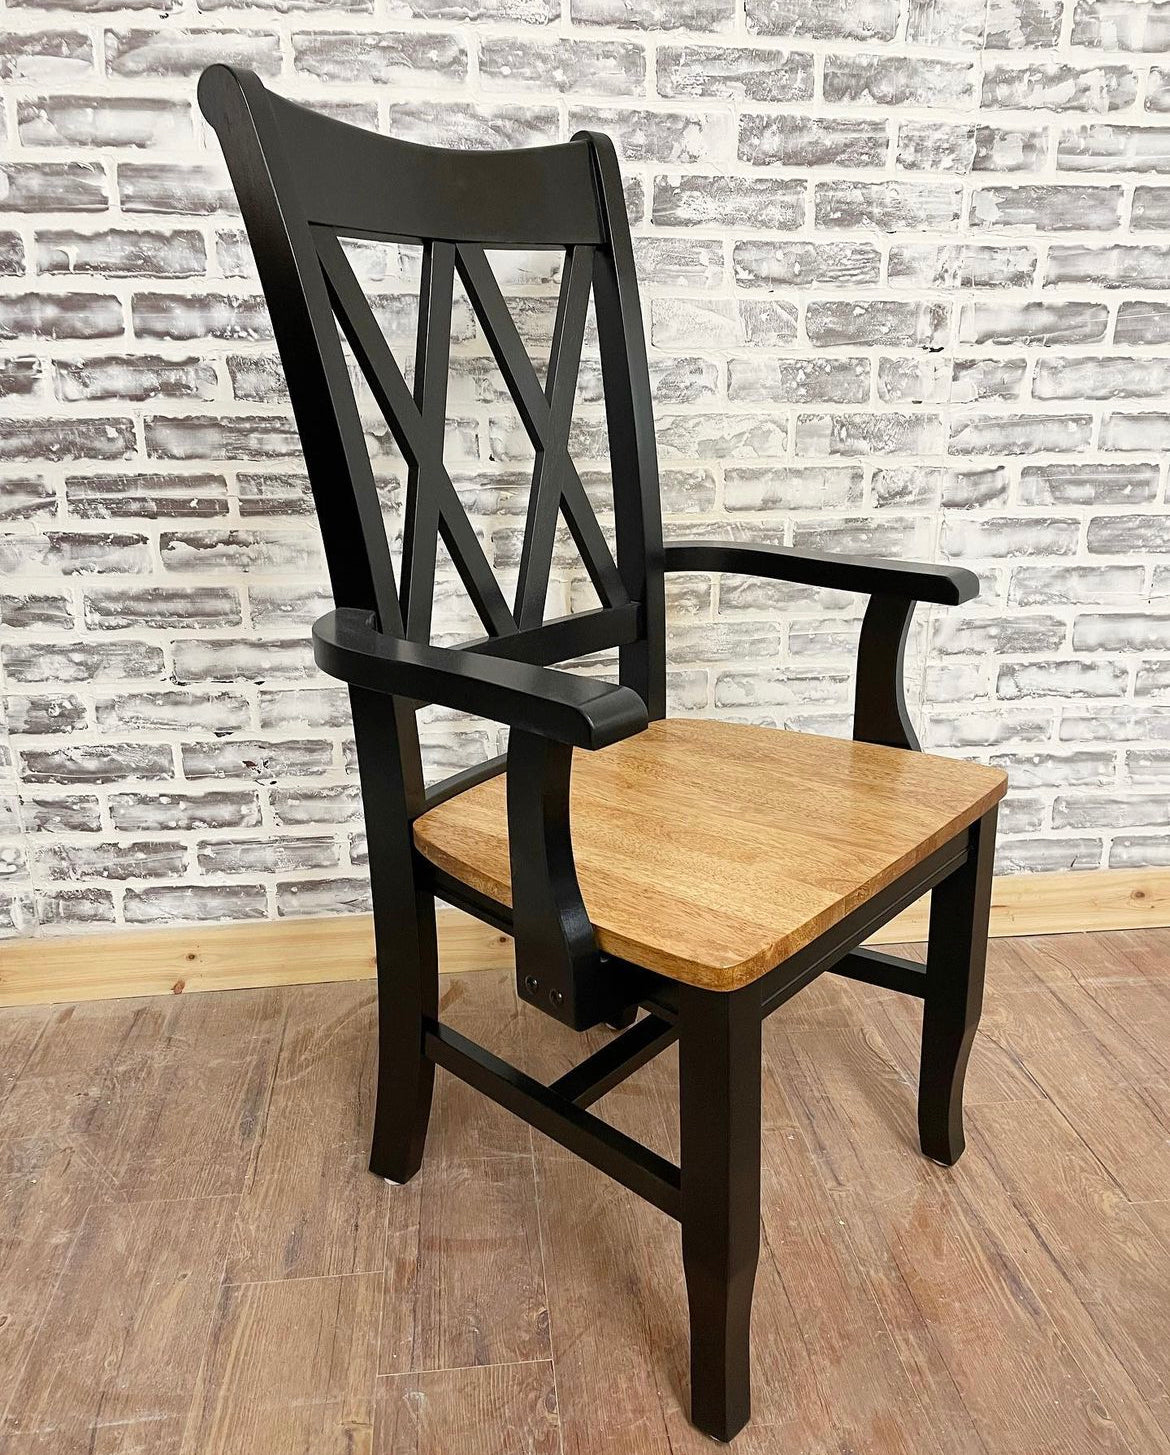 Double Cross Back Arm Chair painted black with Early American Seat.